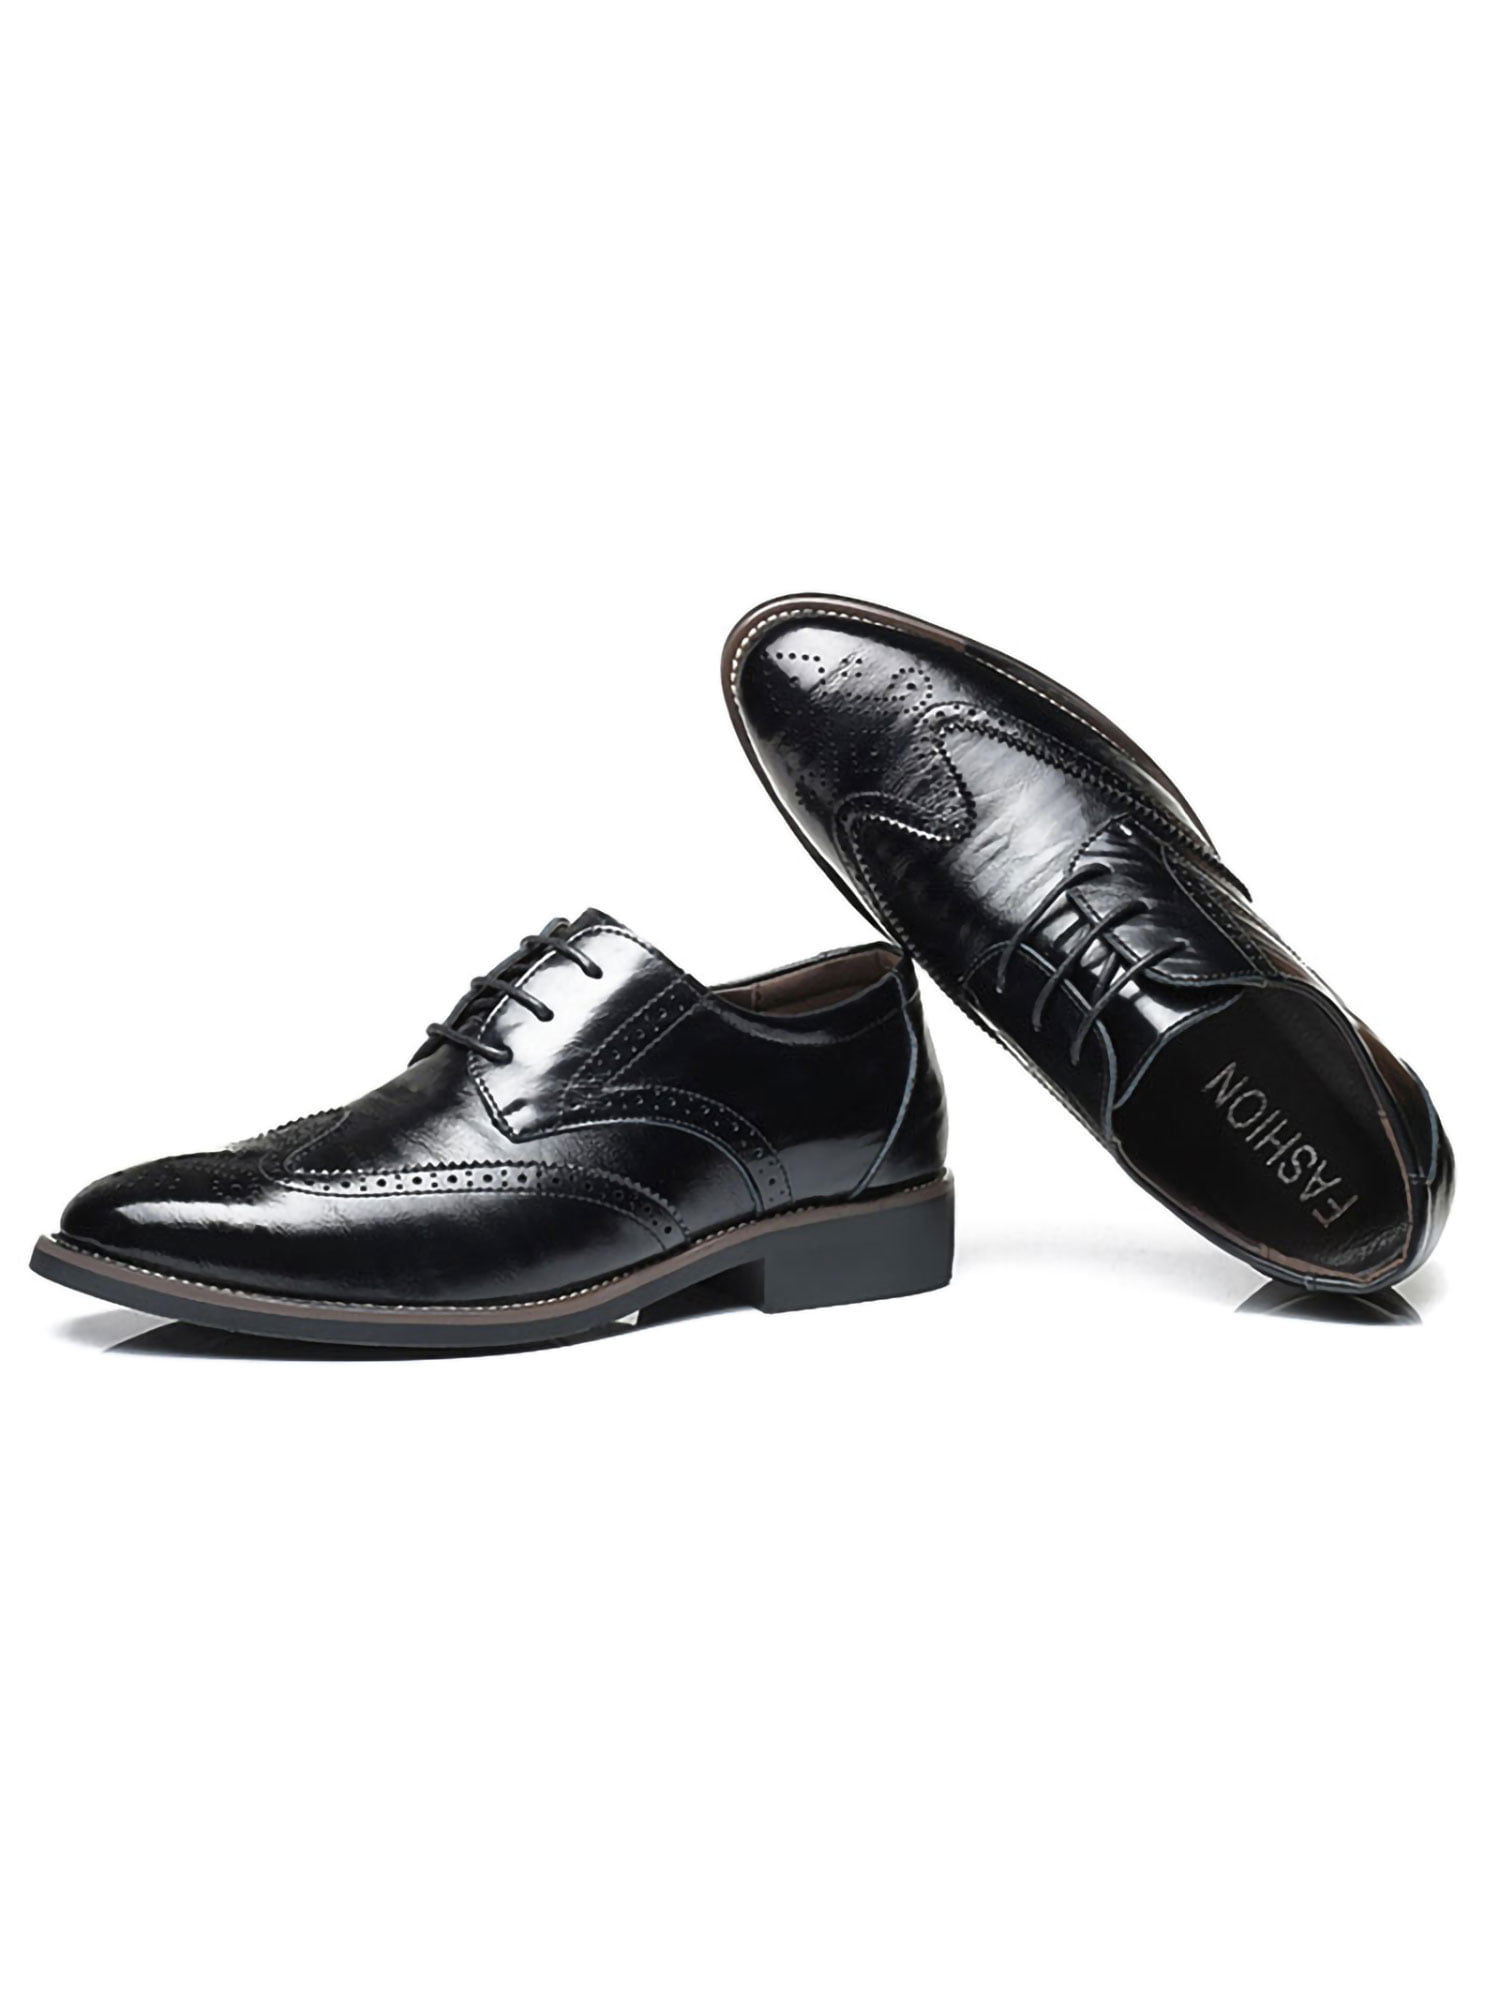 Mens Dress Faux Leather Shoes Lace Up Black Brogue Oxford Casual Office Formal 